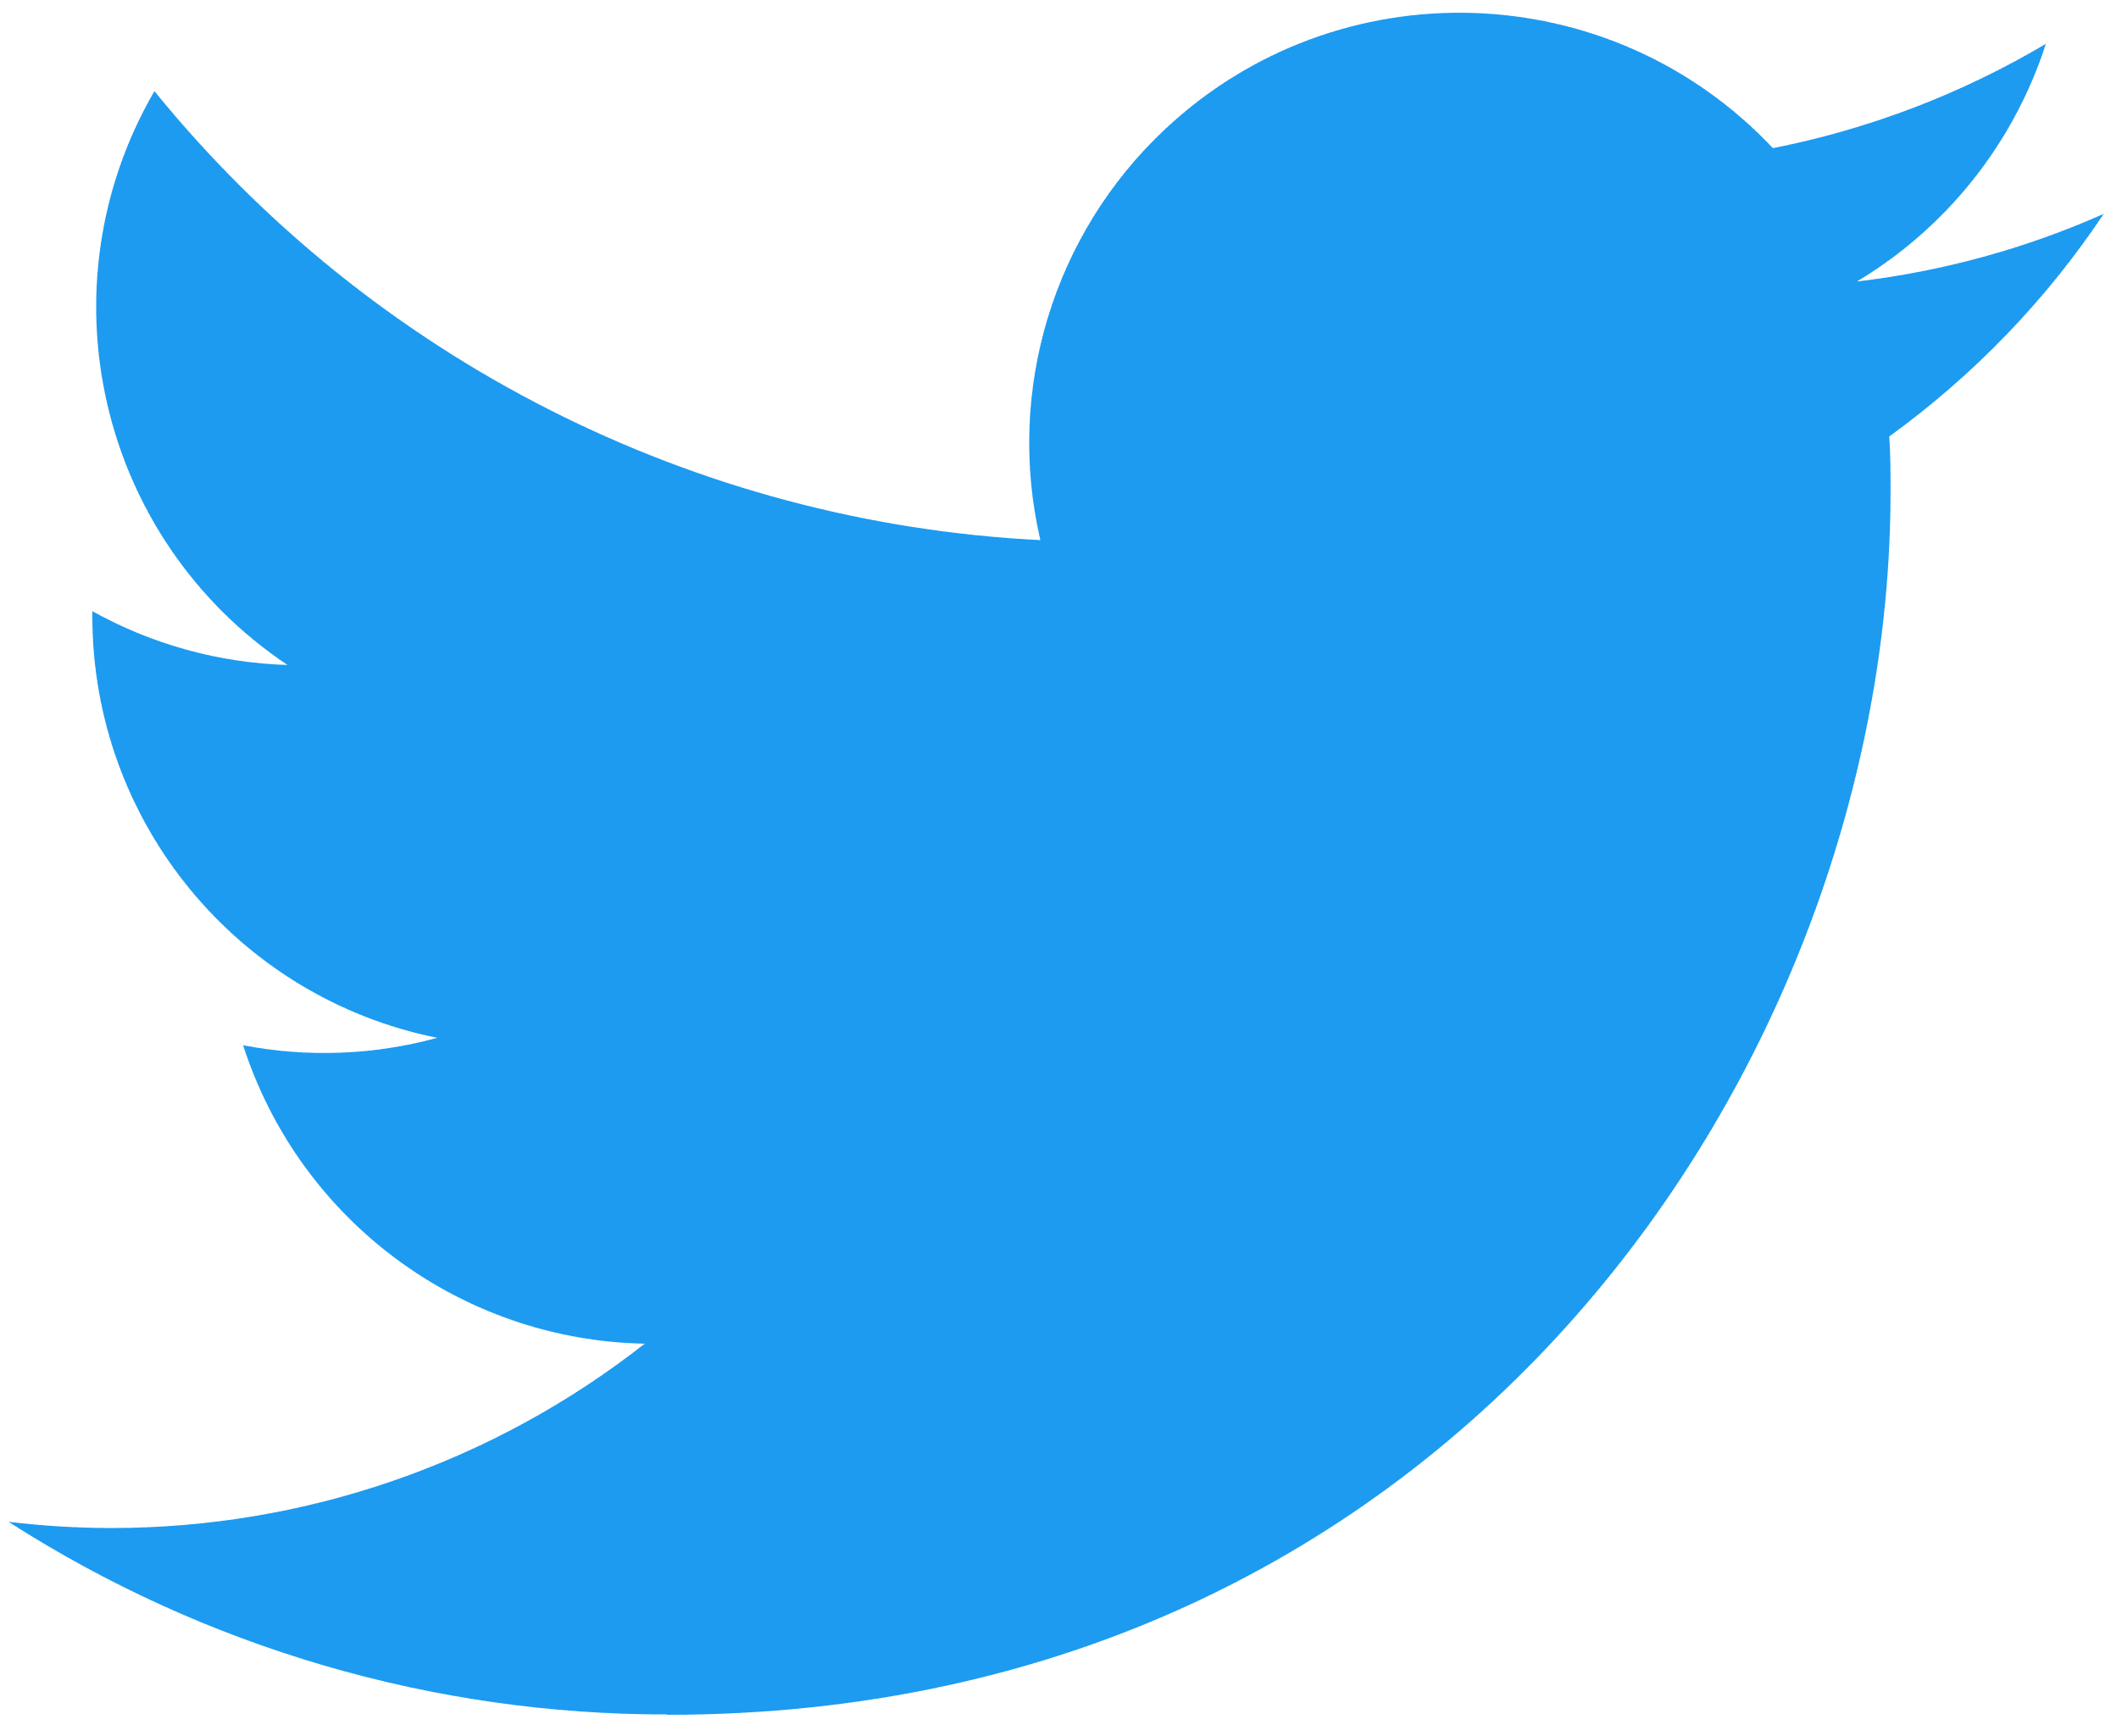 Twitter Advertising Services